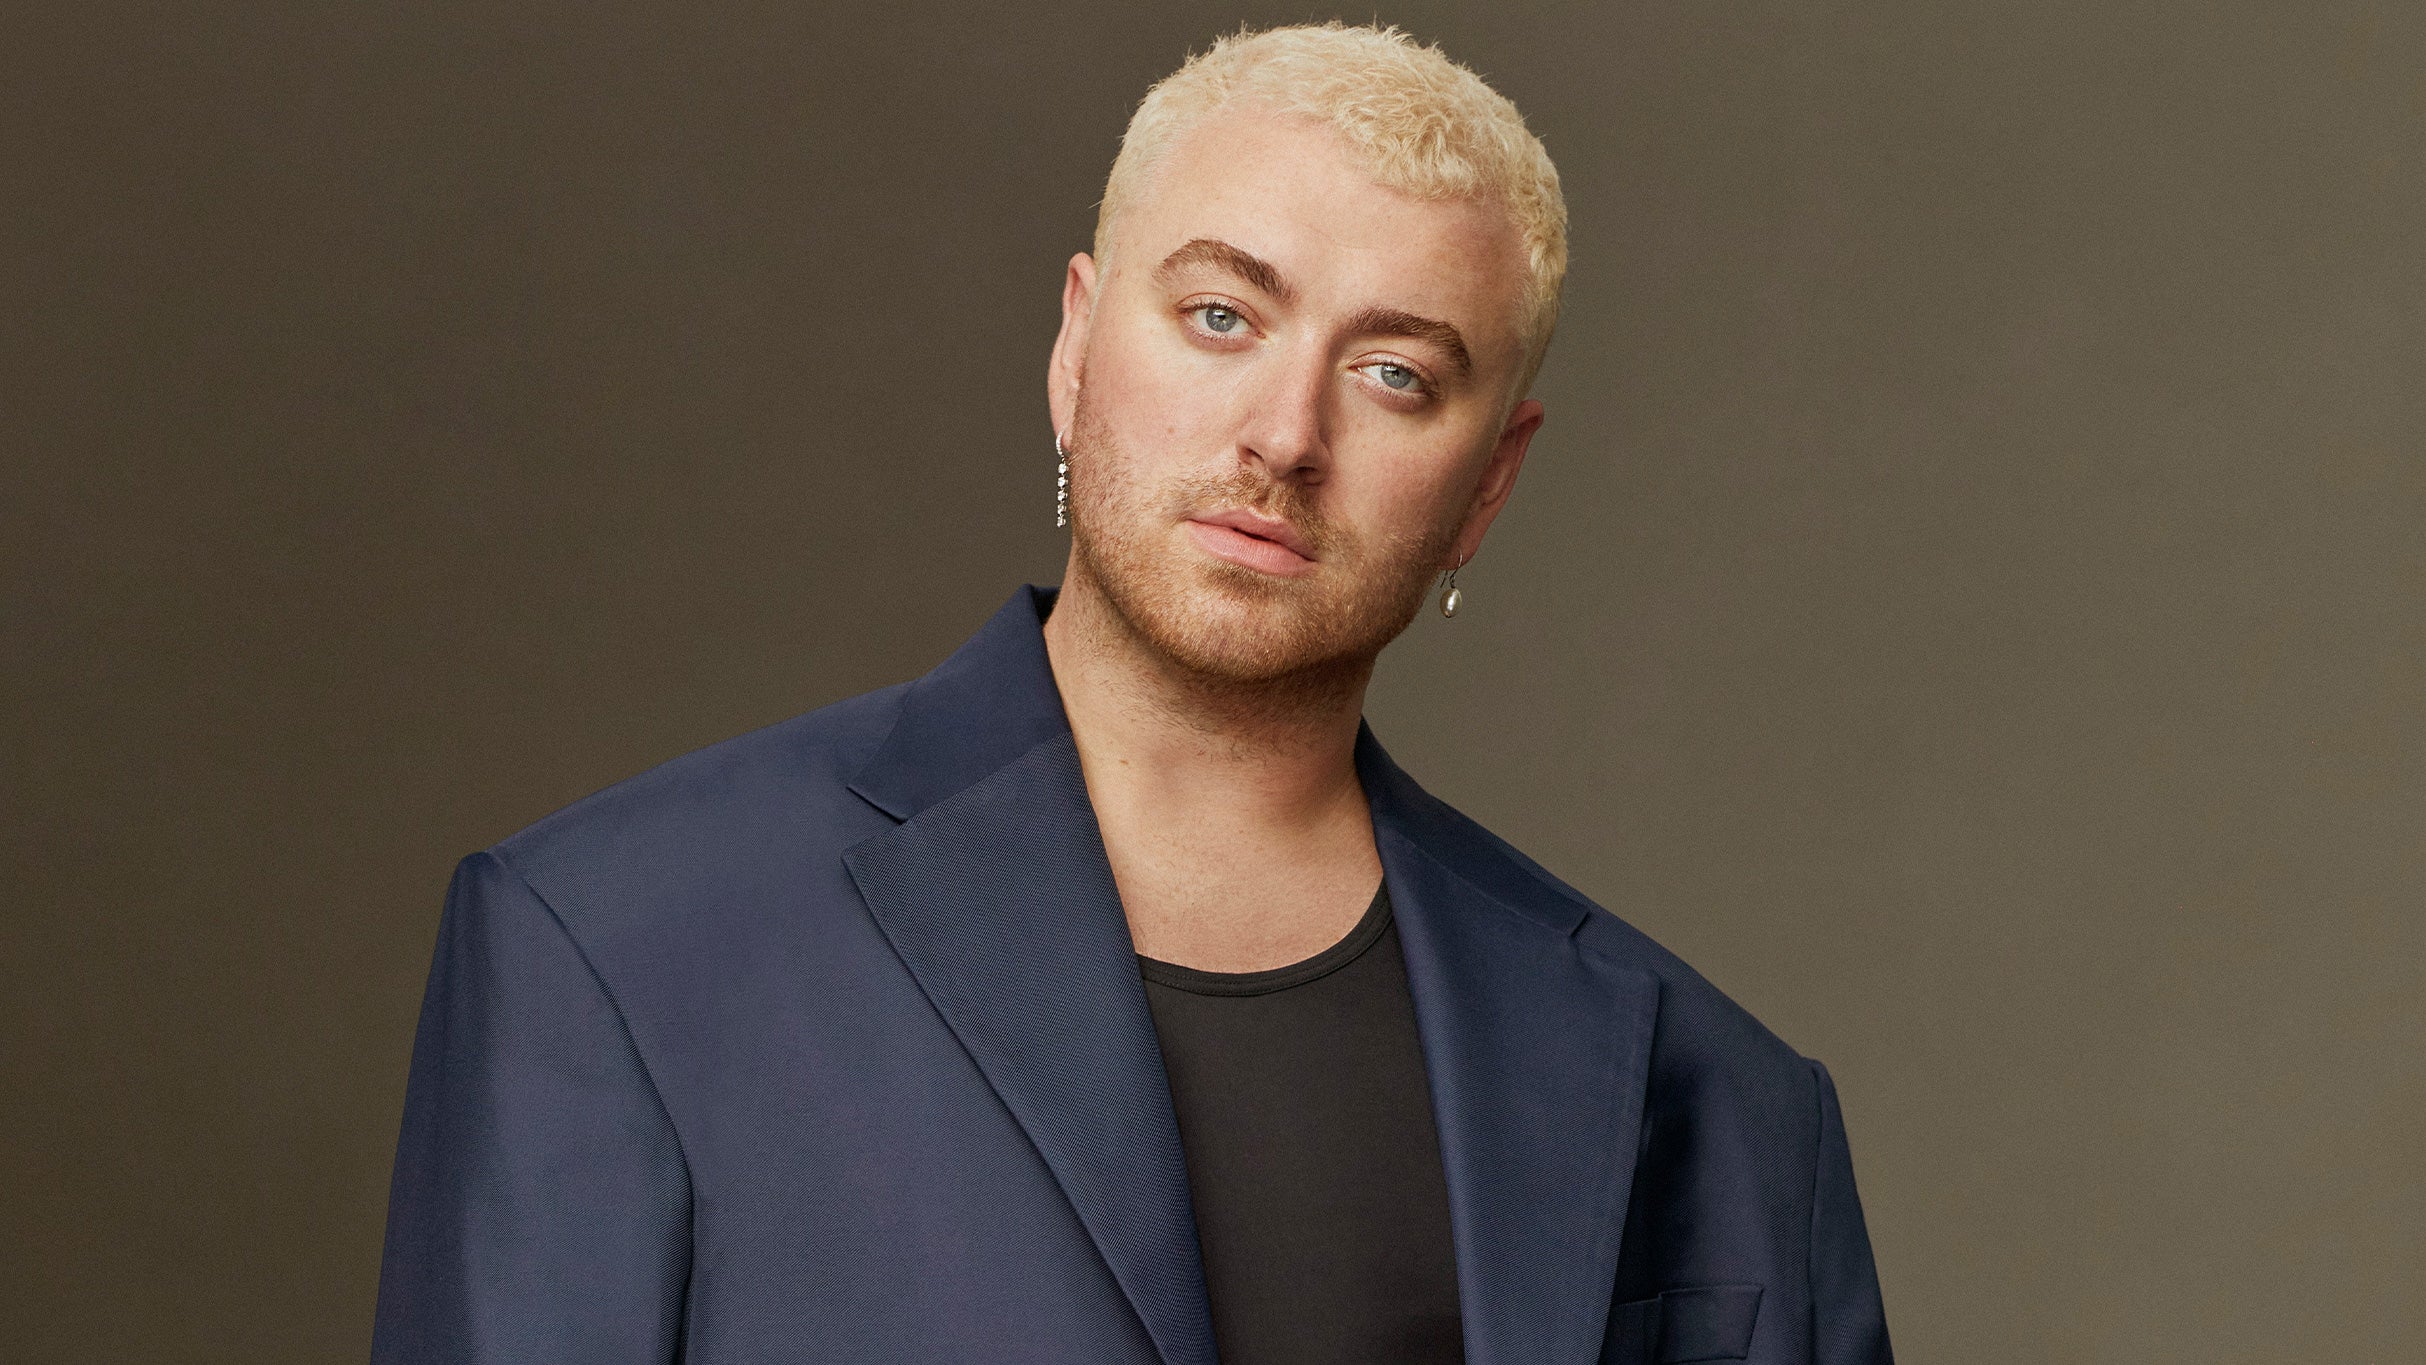 SAM SMITH 2023 :: GLORIA the tour presale password for approved tickets in Nashville